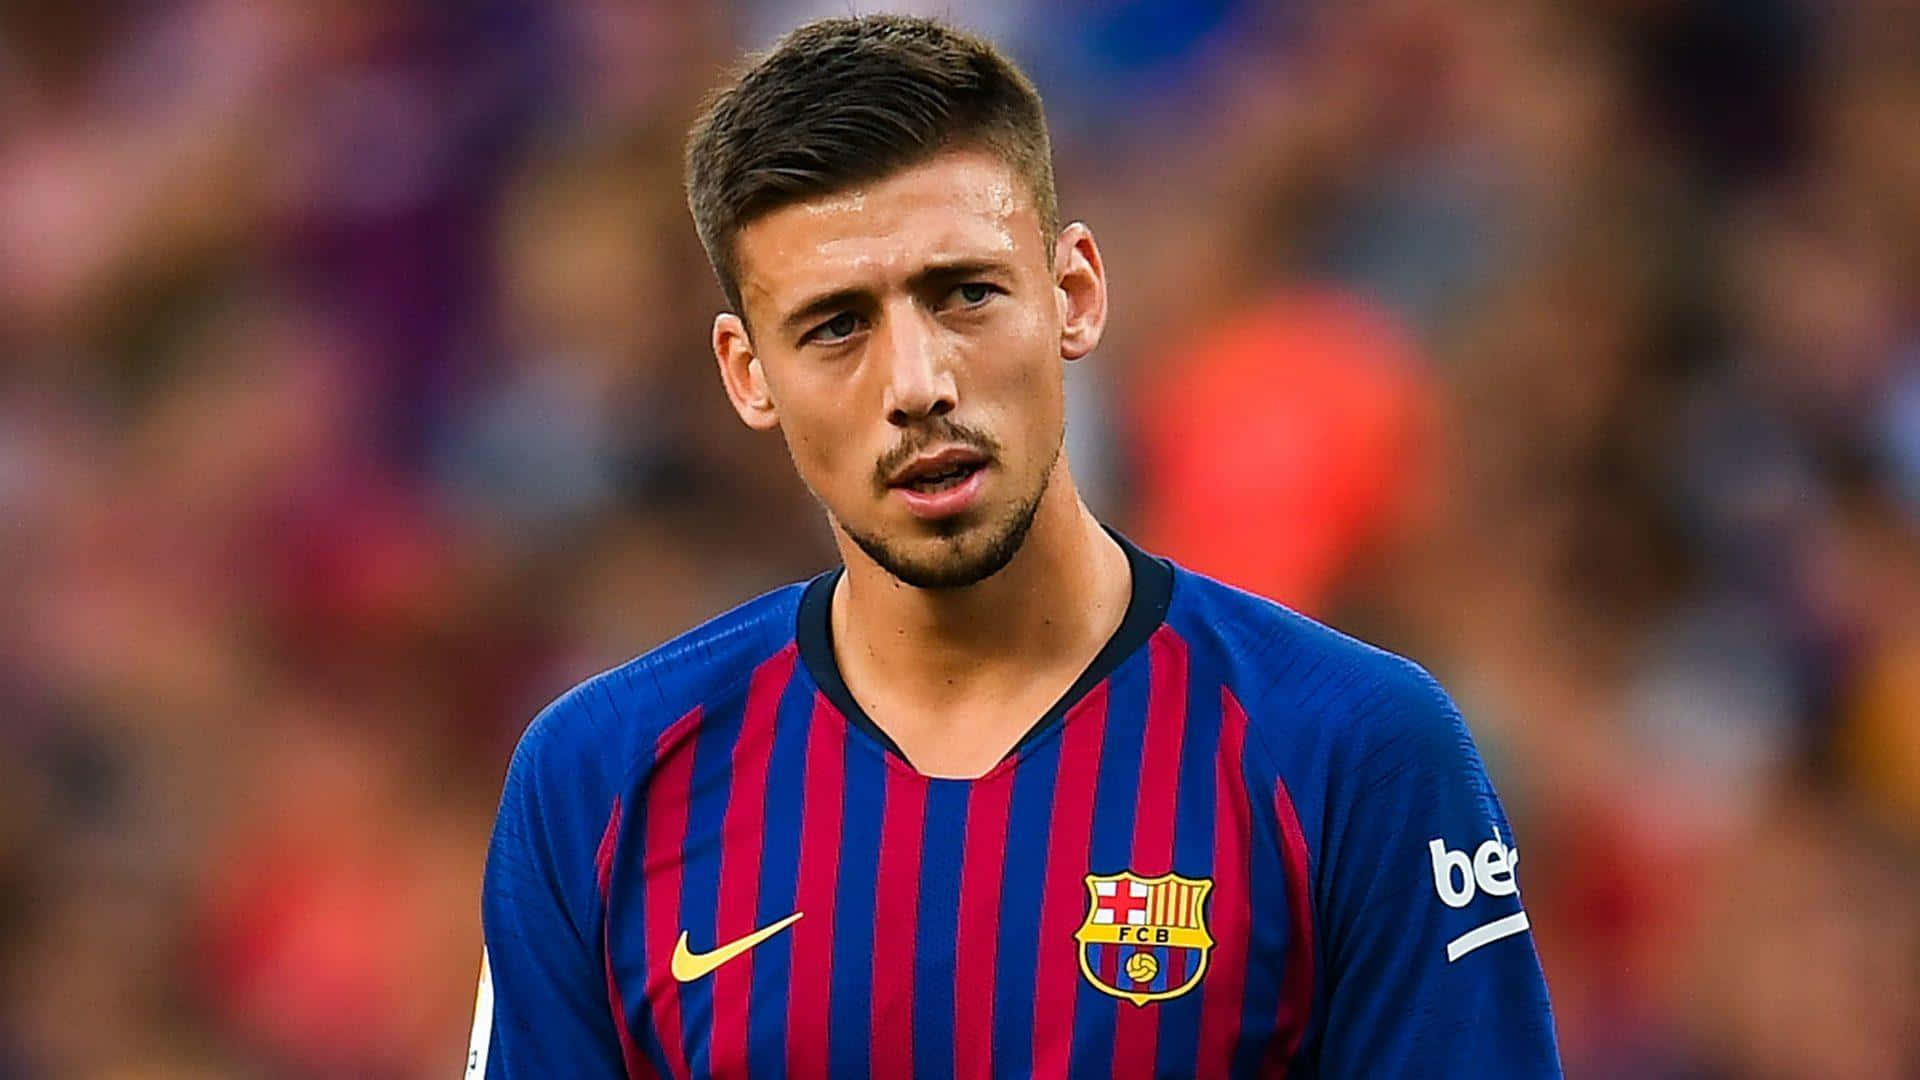 Clément Lenglet In Action During A Soccer Match Wallpaper